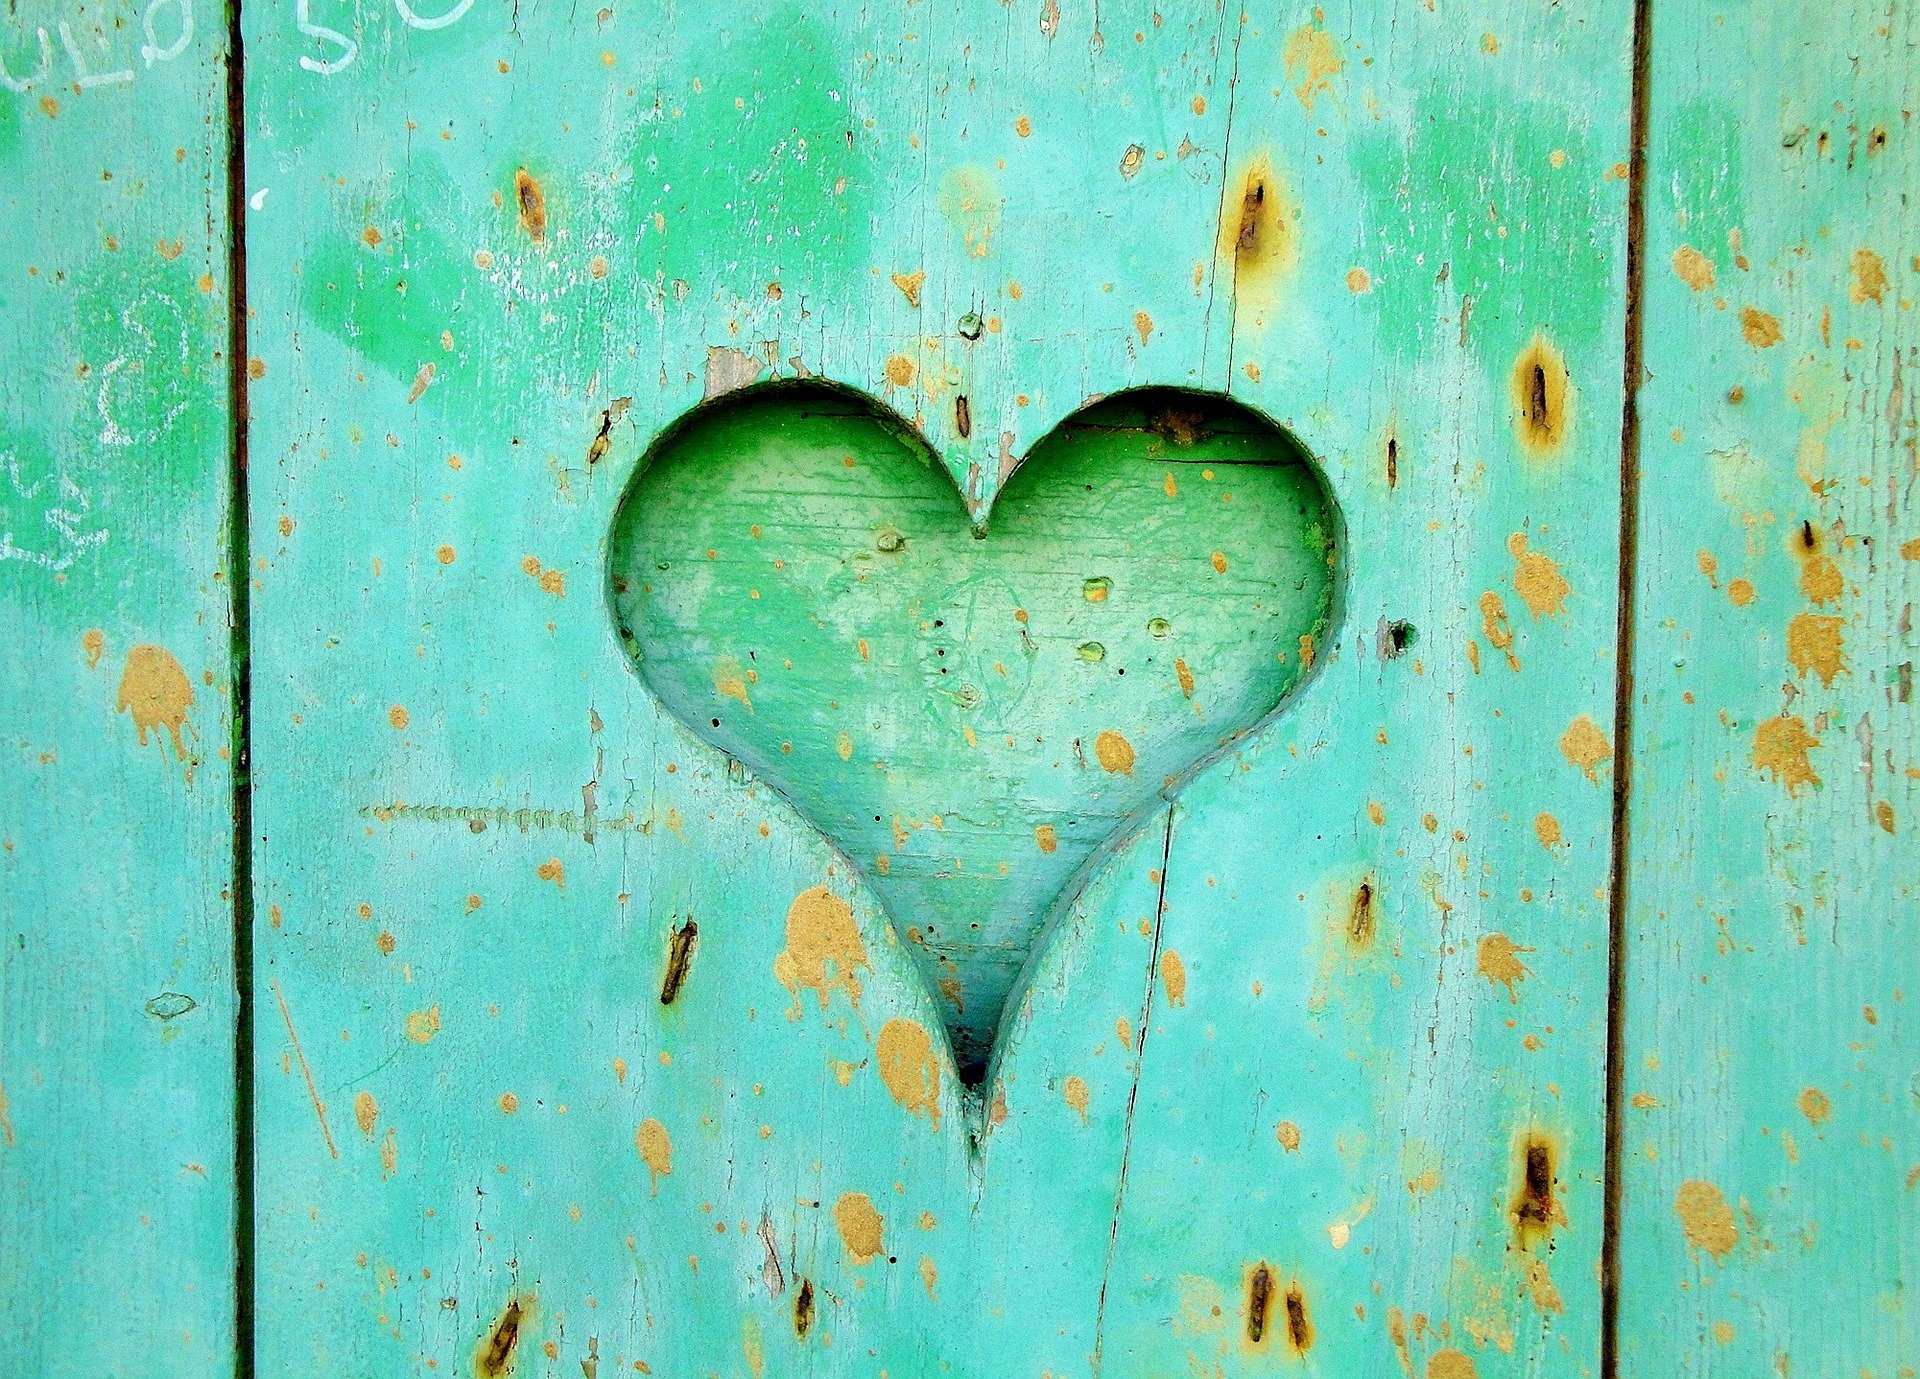 Last minute Valentine's Day gift ideas. A picture of a green heart